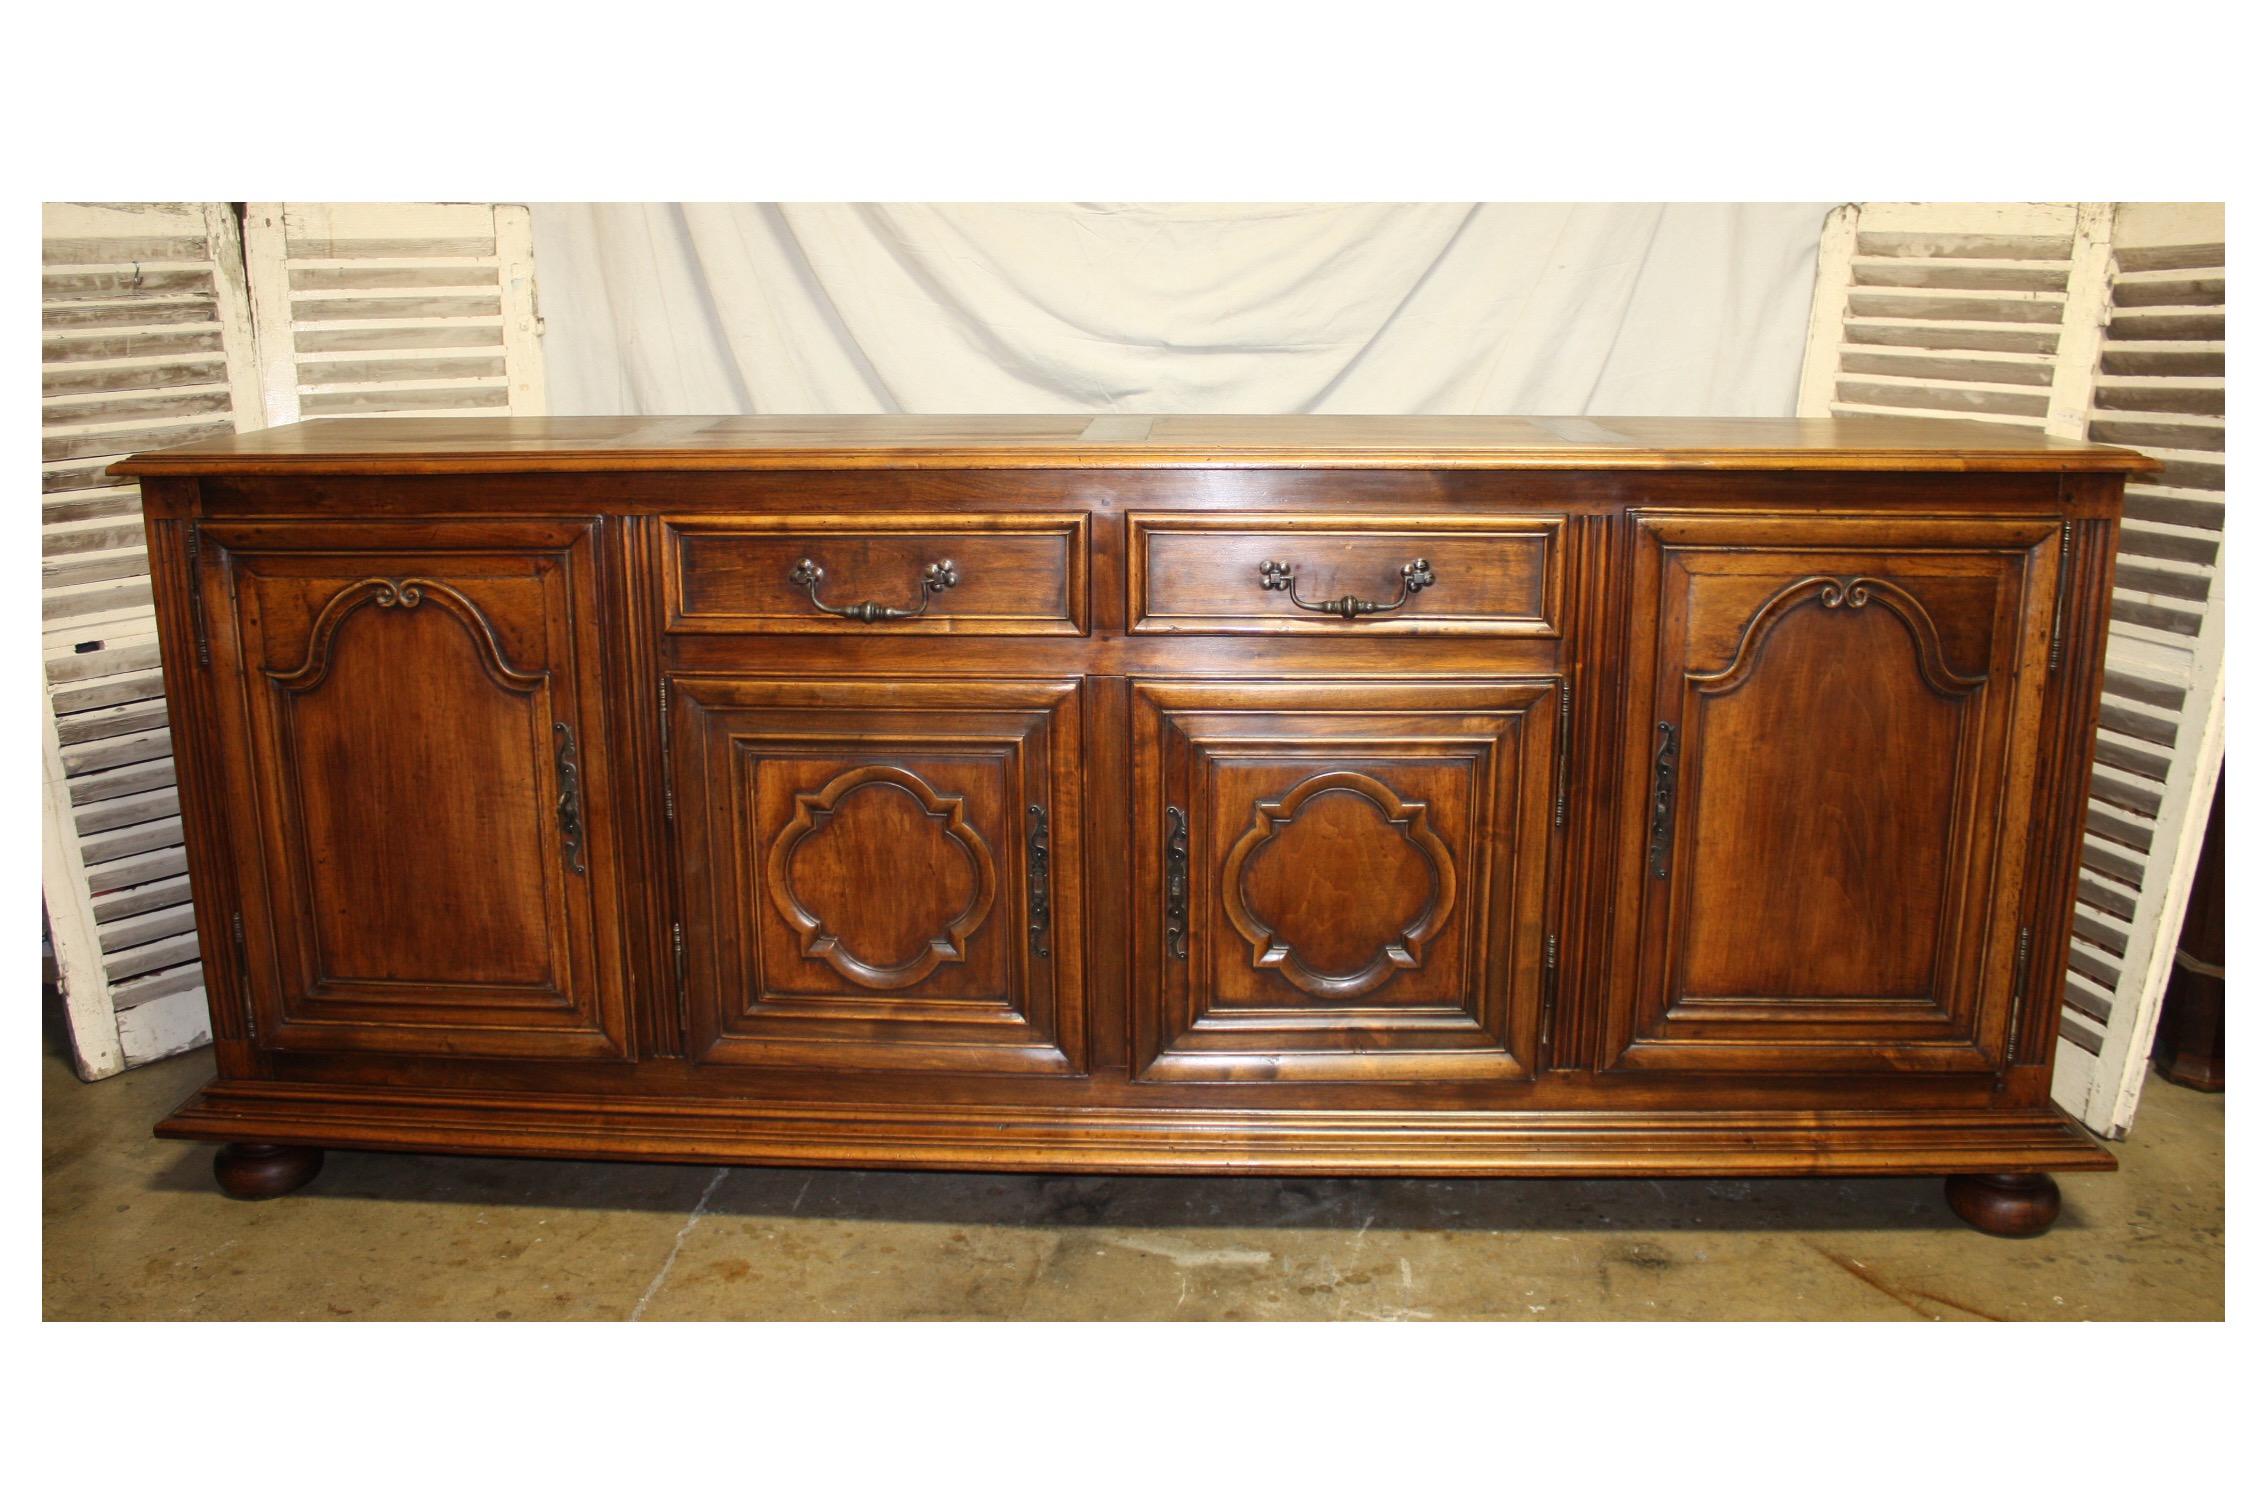 French 19th century Louis XIV style sideboard.